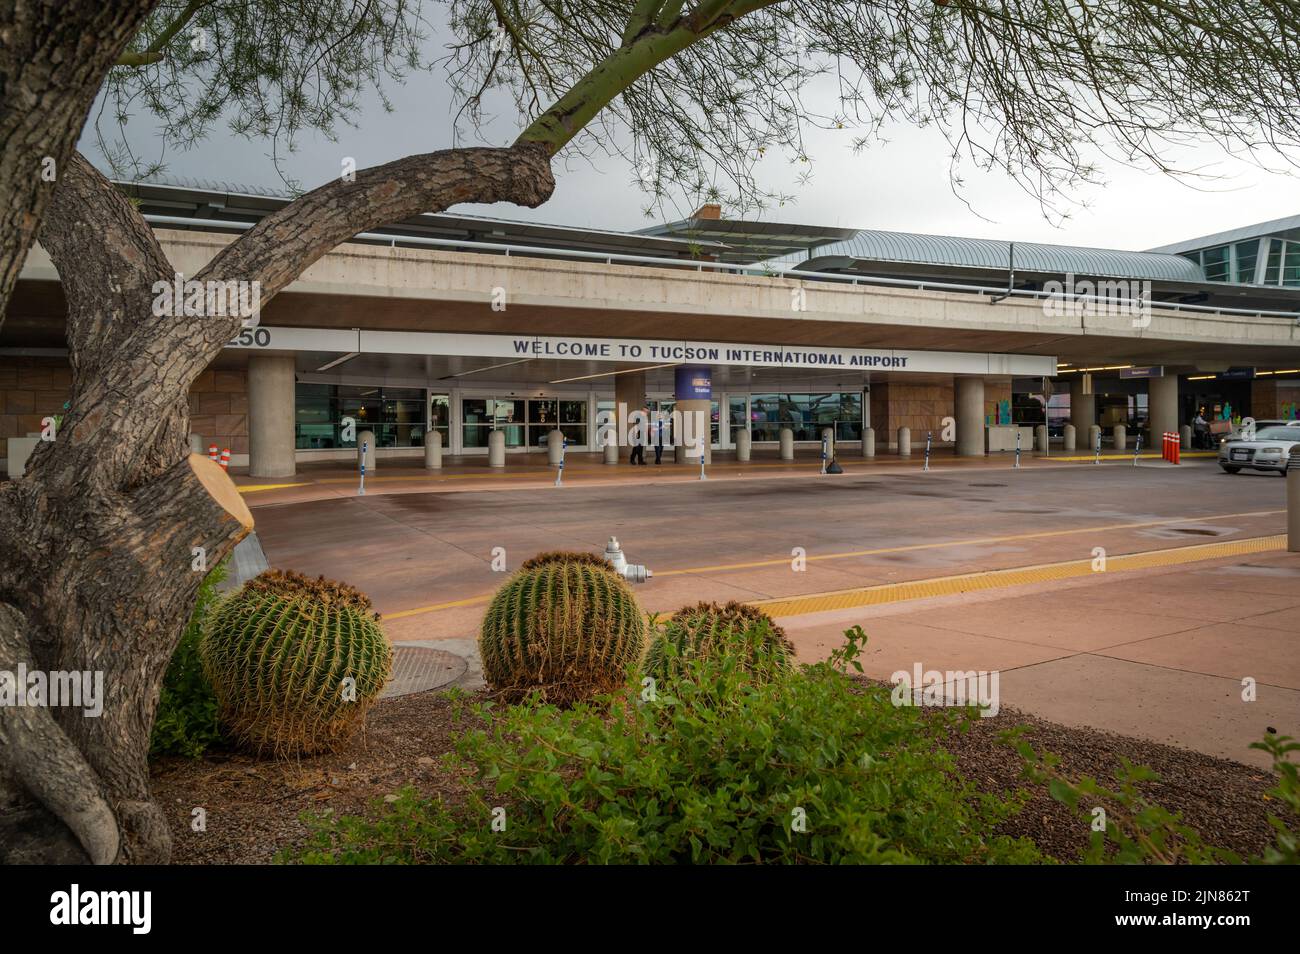 Welcome to Tucson International Airport, written on building. Stock Photo